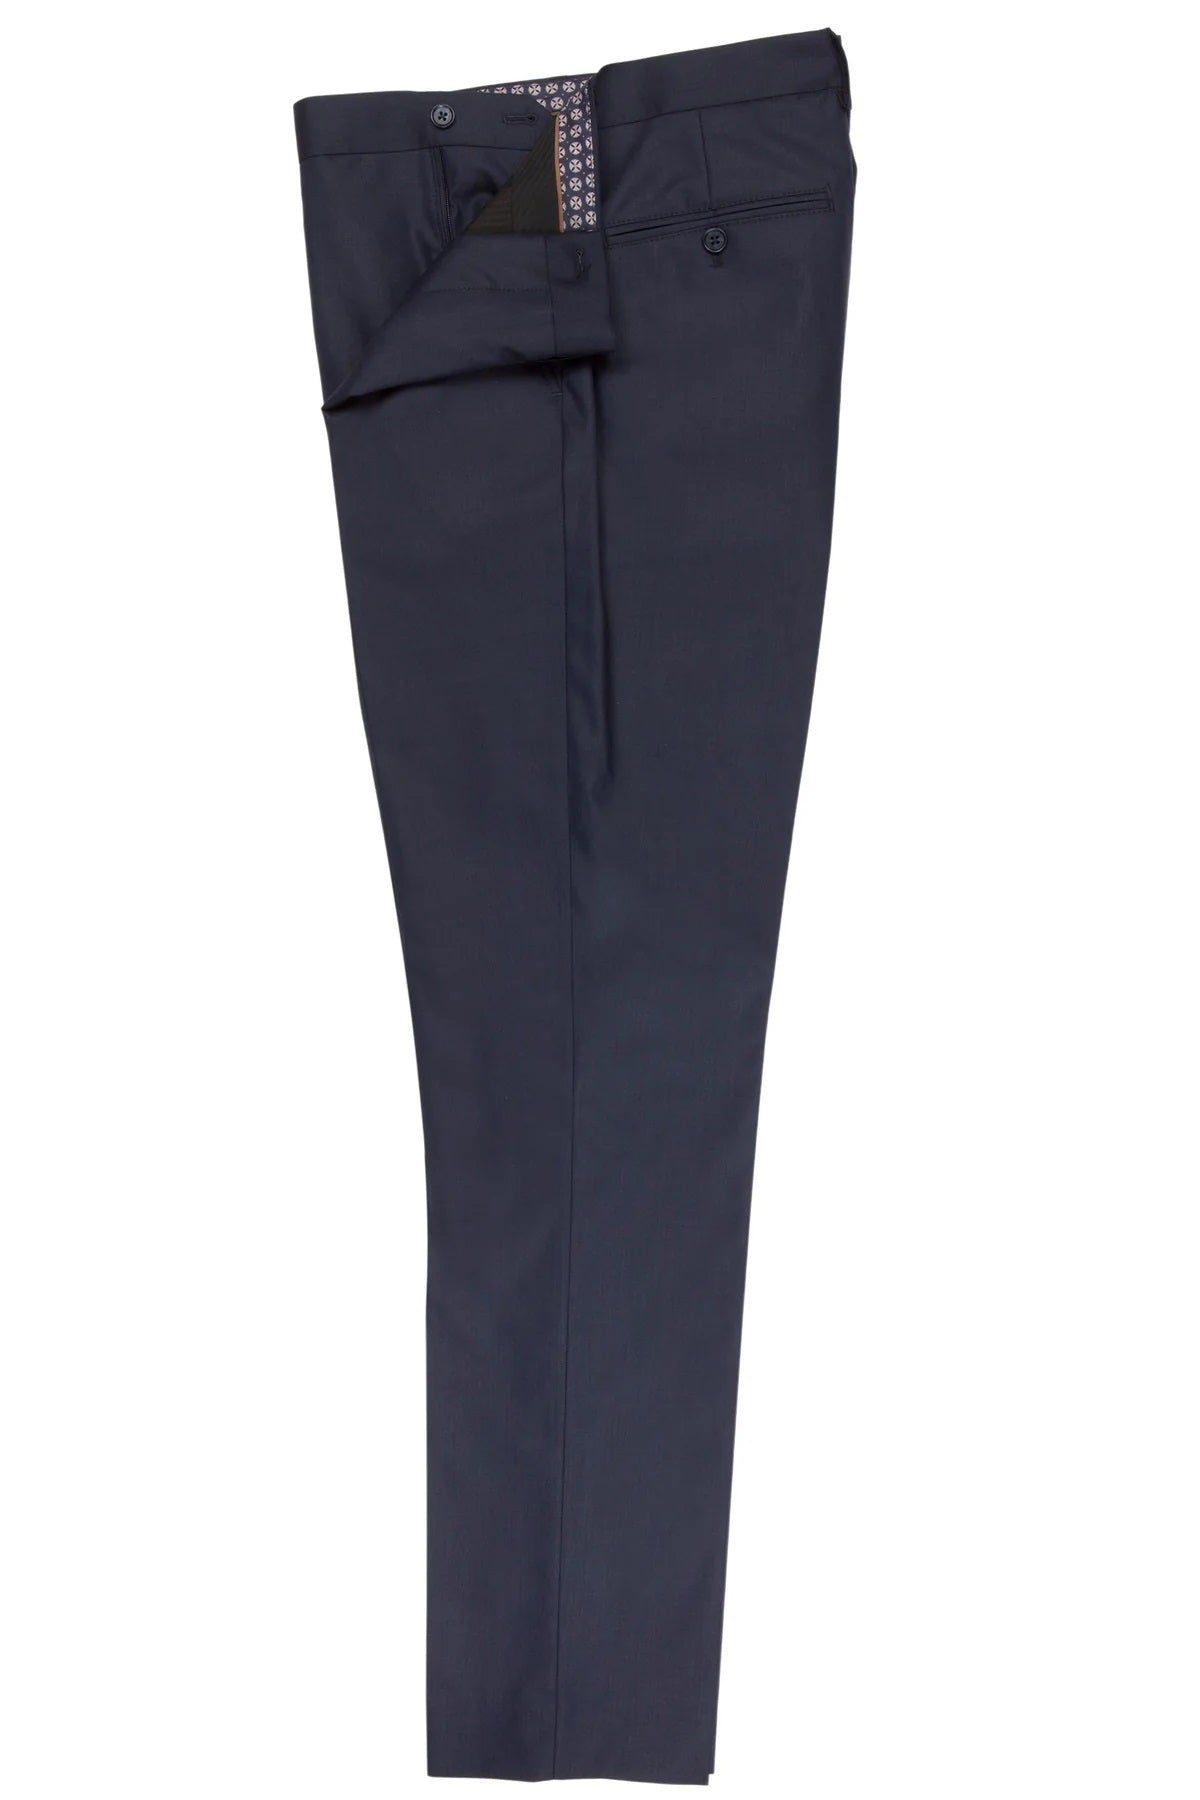 Guide London Navy Stitch Detail Trousers - TR3507